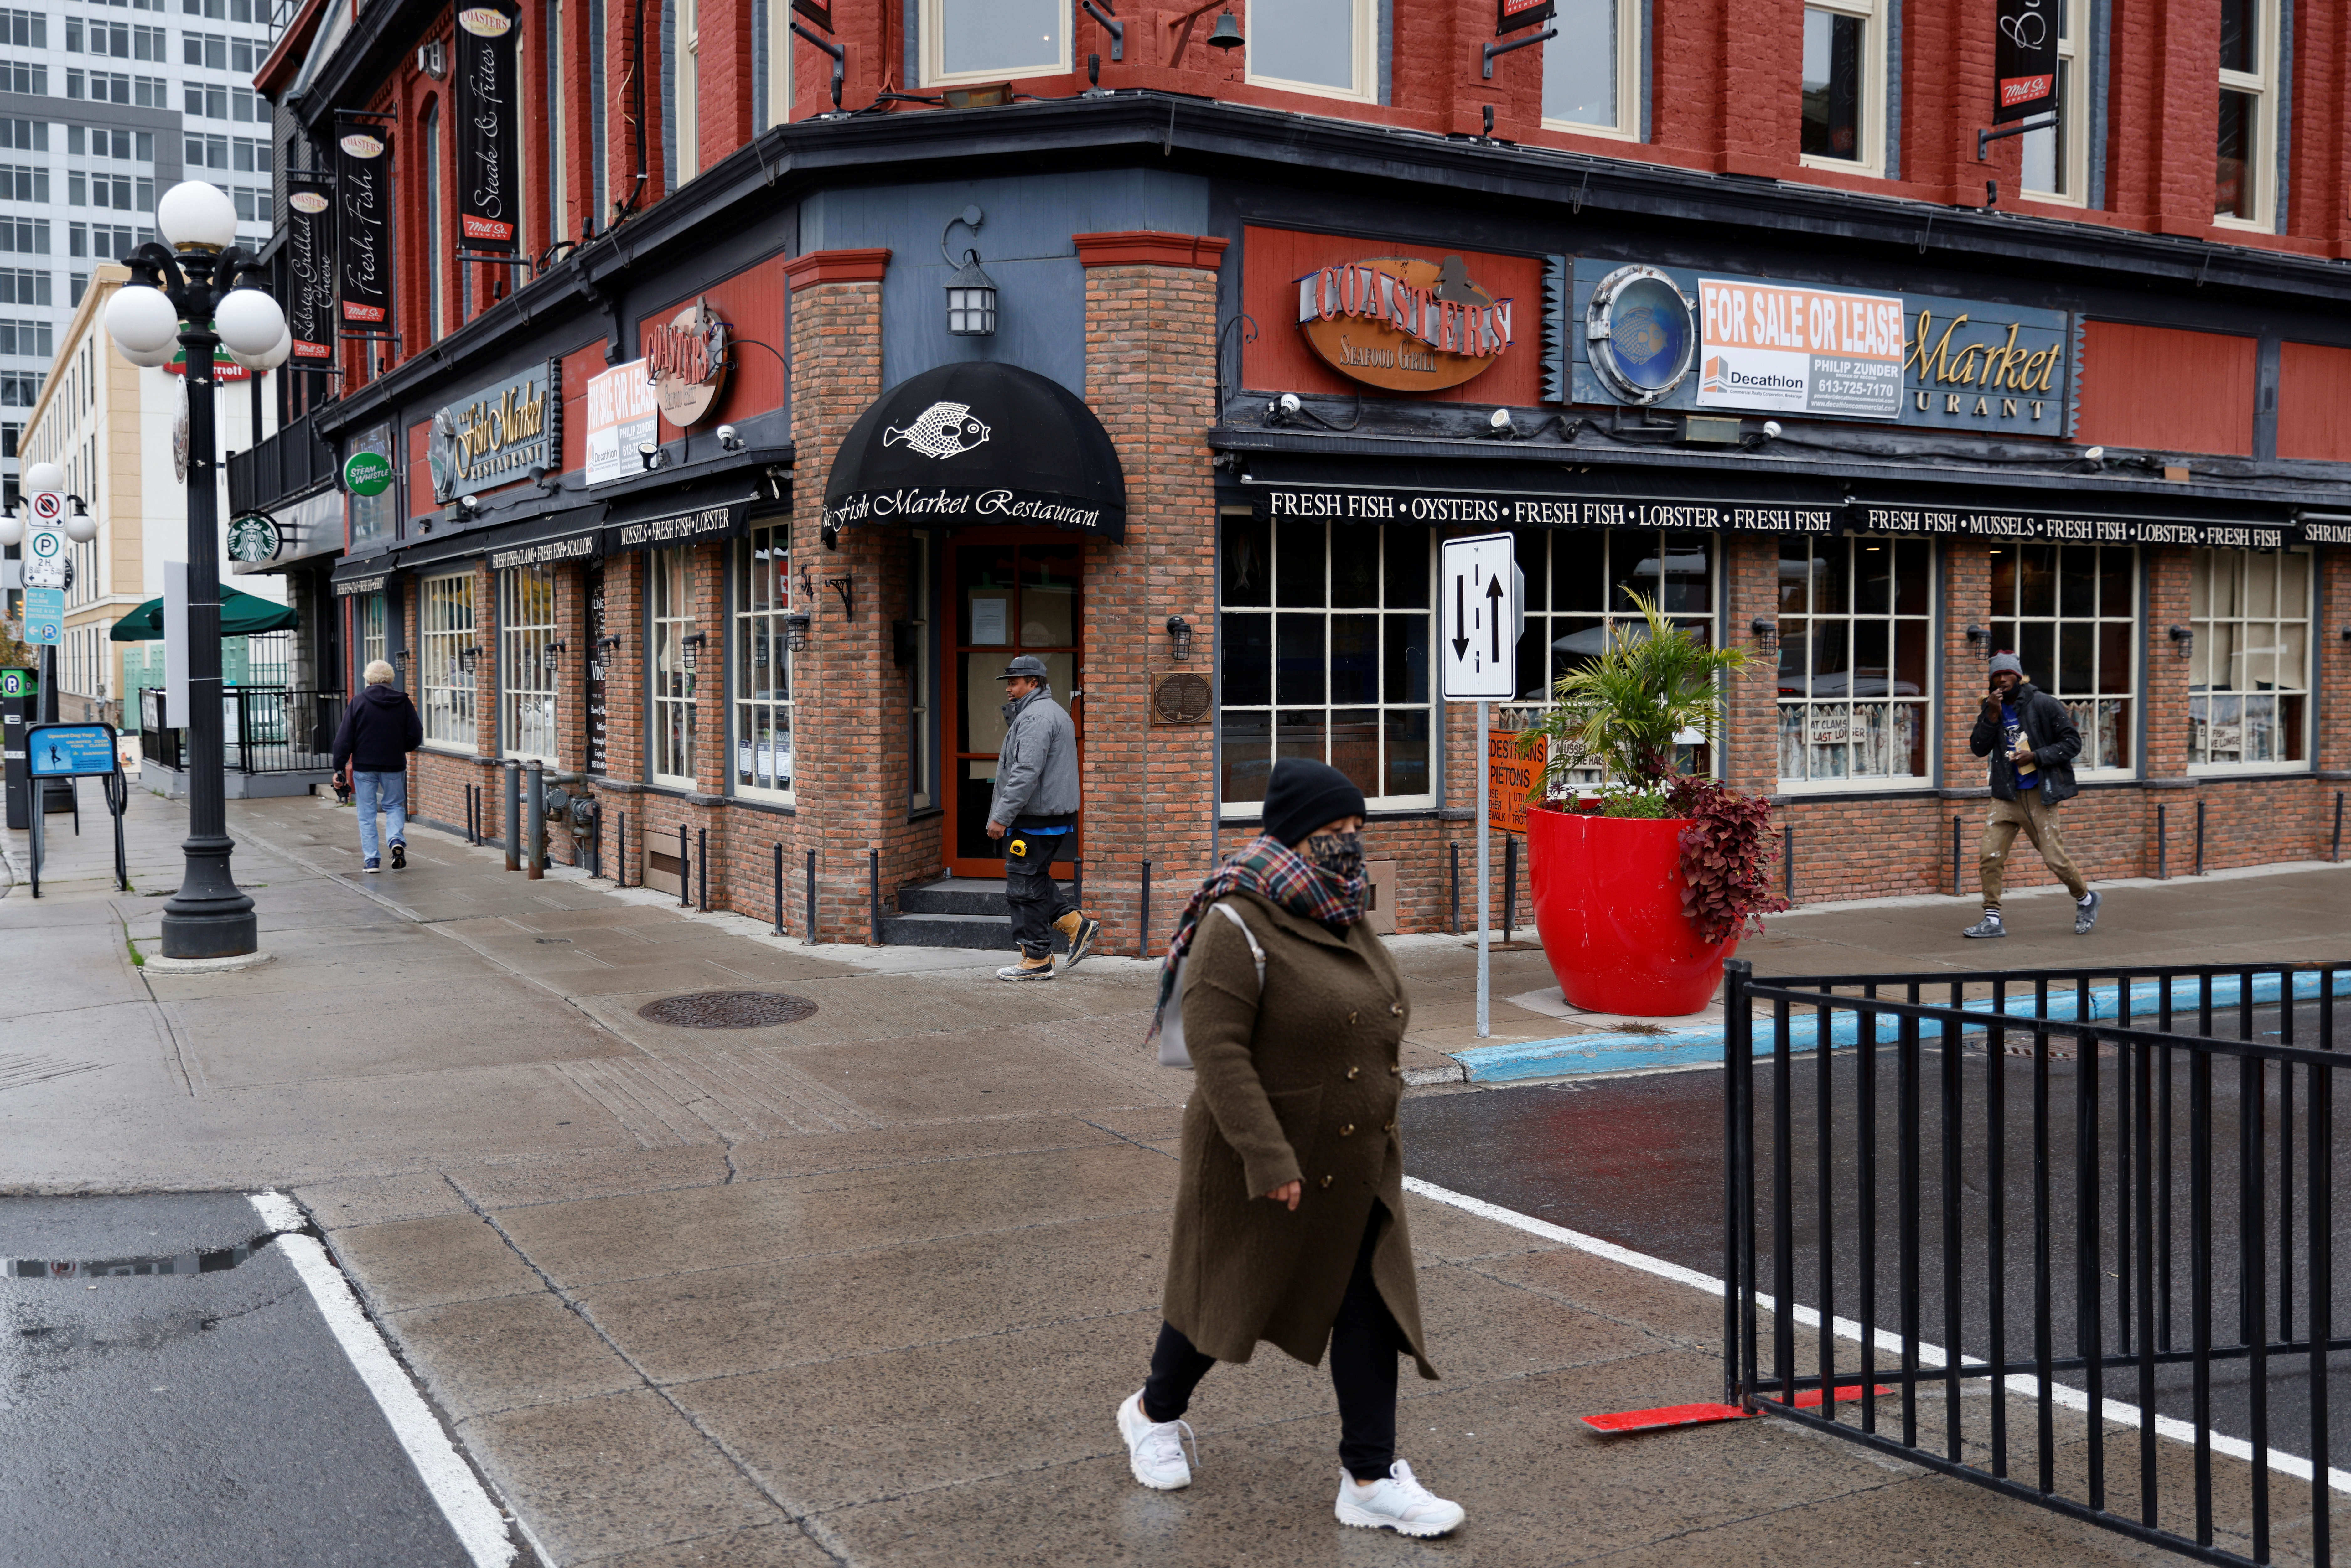 The Fish Market Restaurant in the ByWard Market is seen closed as a result of measures taken to slow the spread of the coronavirus disease (COVID-19) in Ottawa